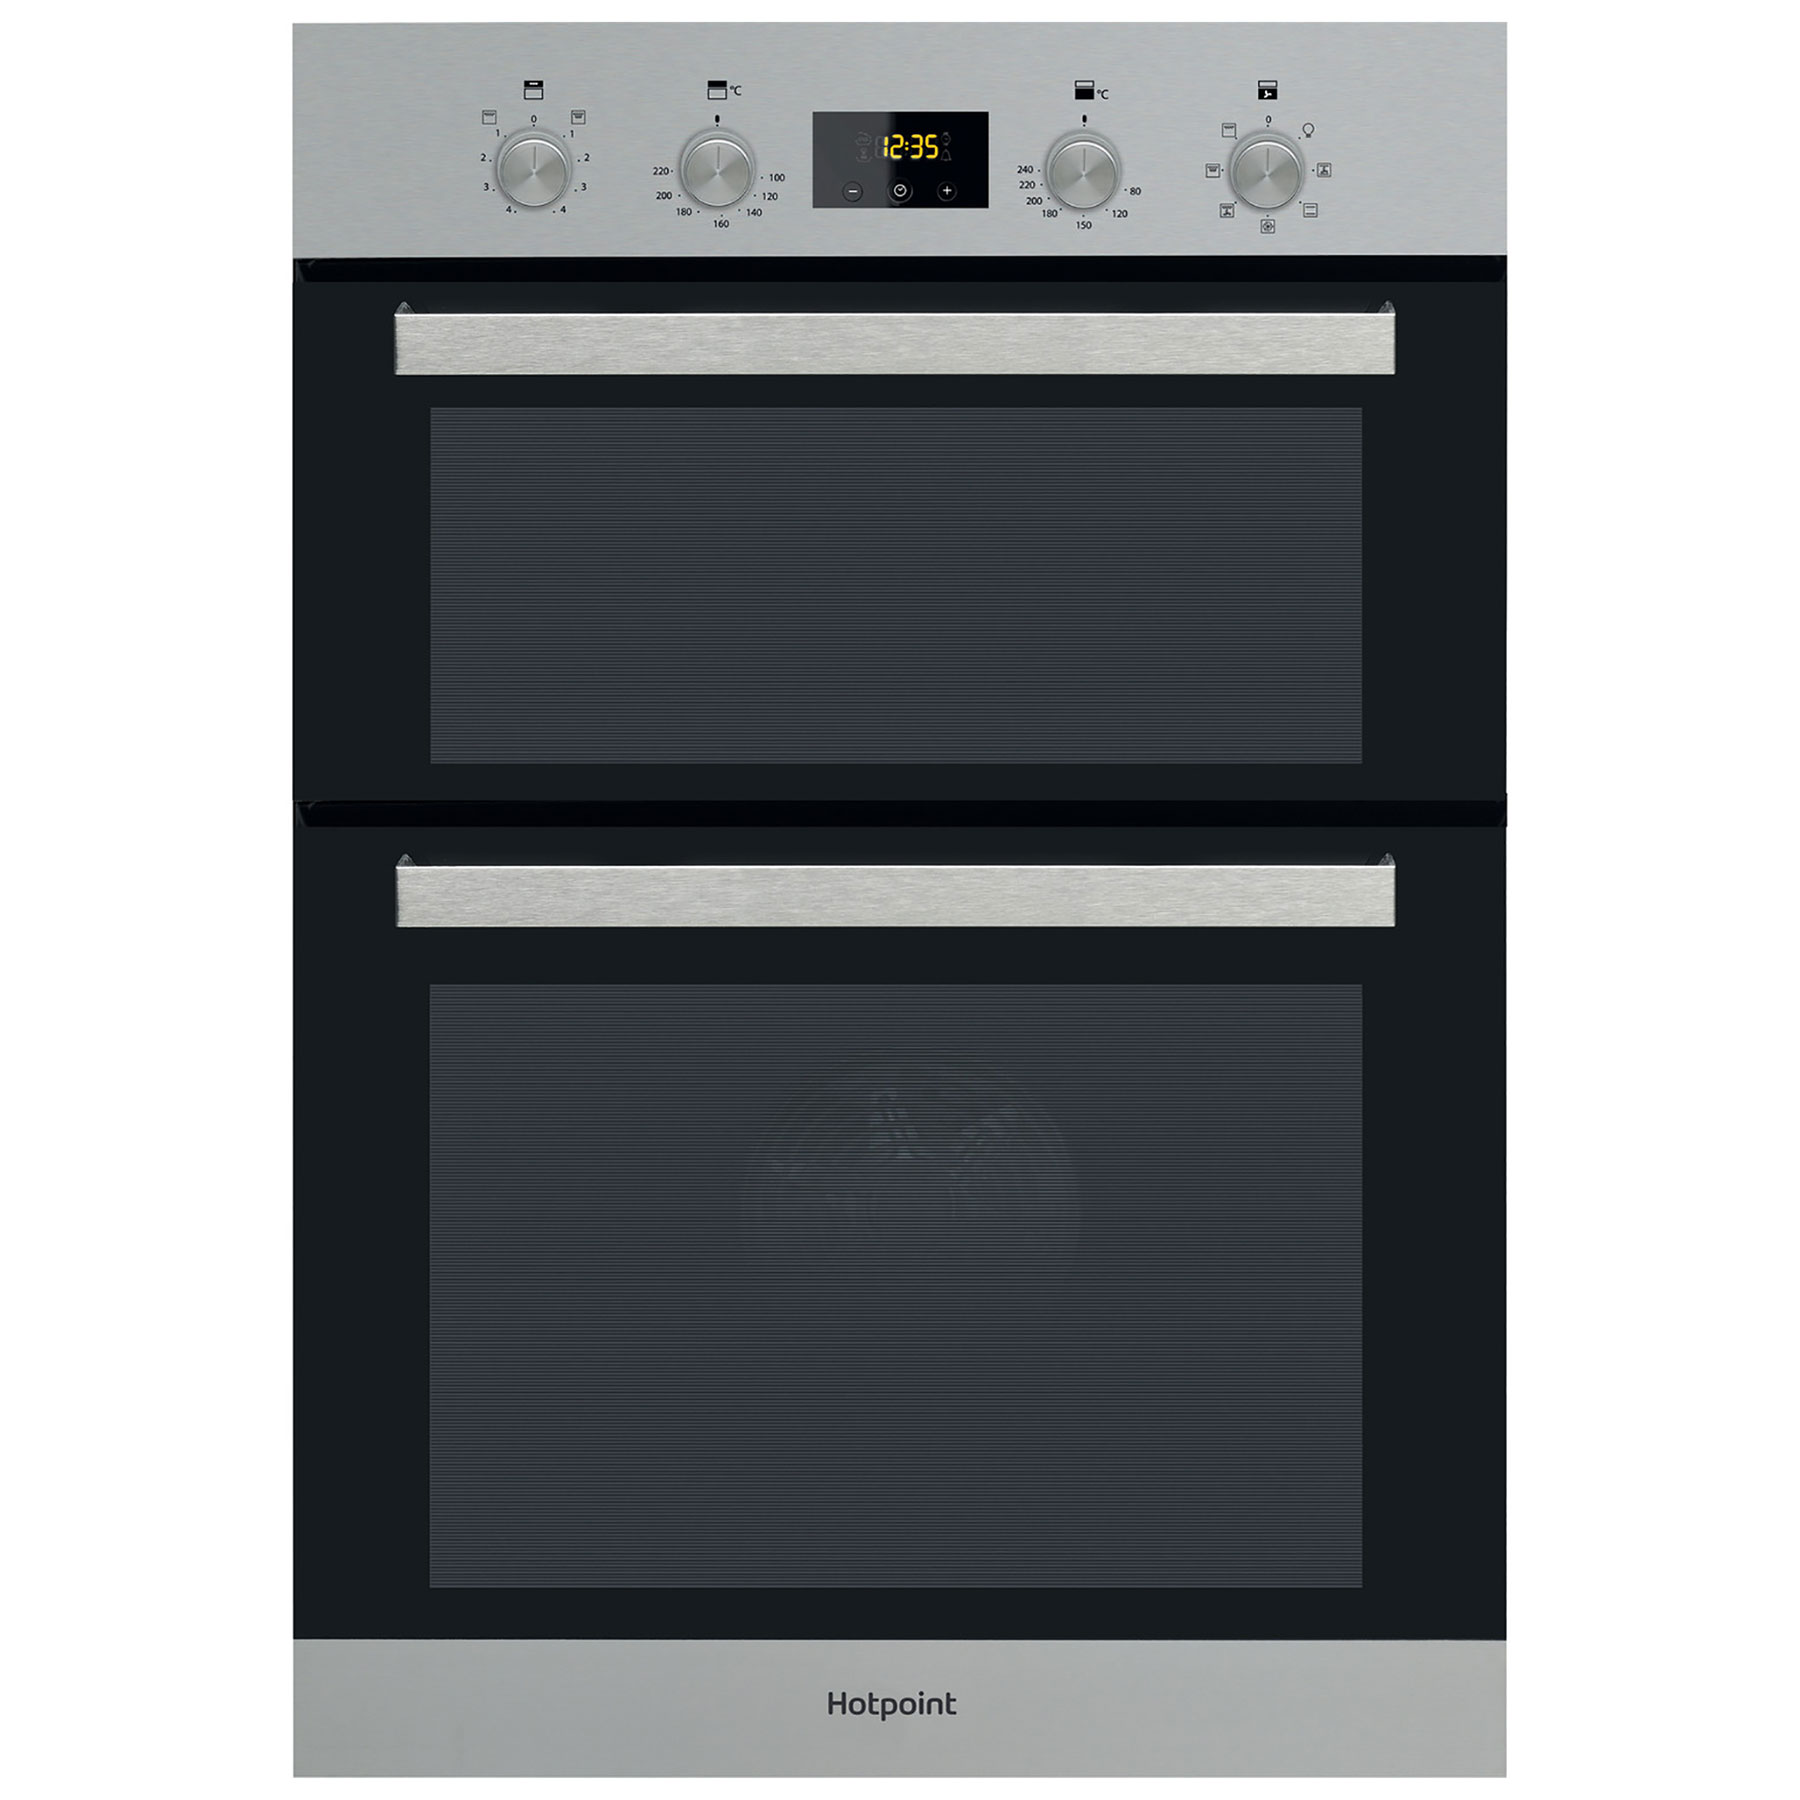 Hotpoint DKD3841IX Built In Electric Double Oven in St Steel 70L A A R